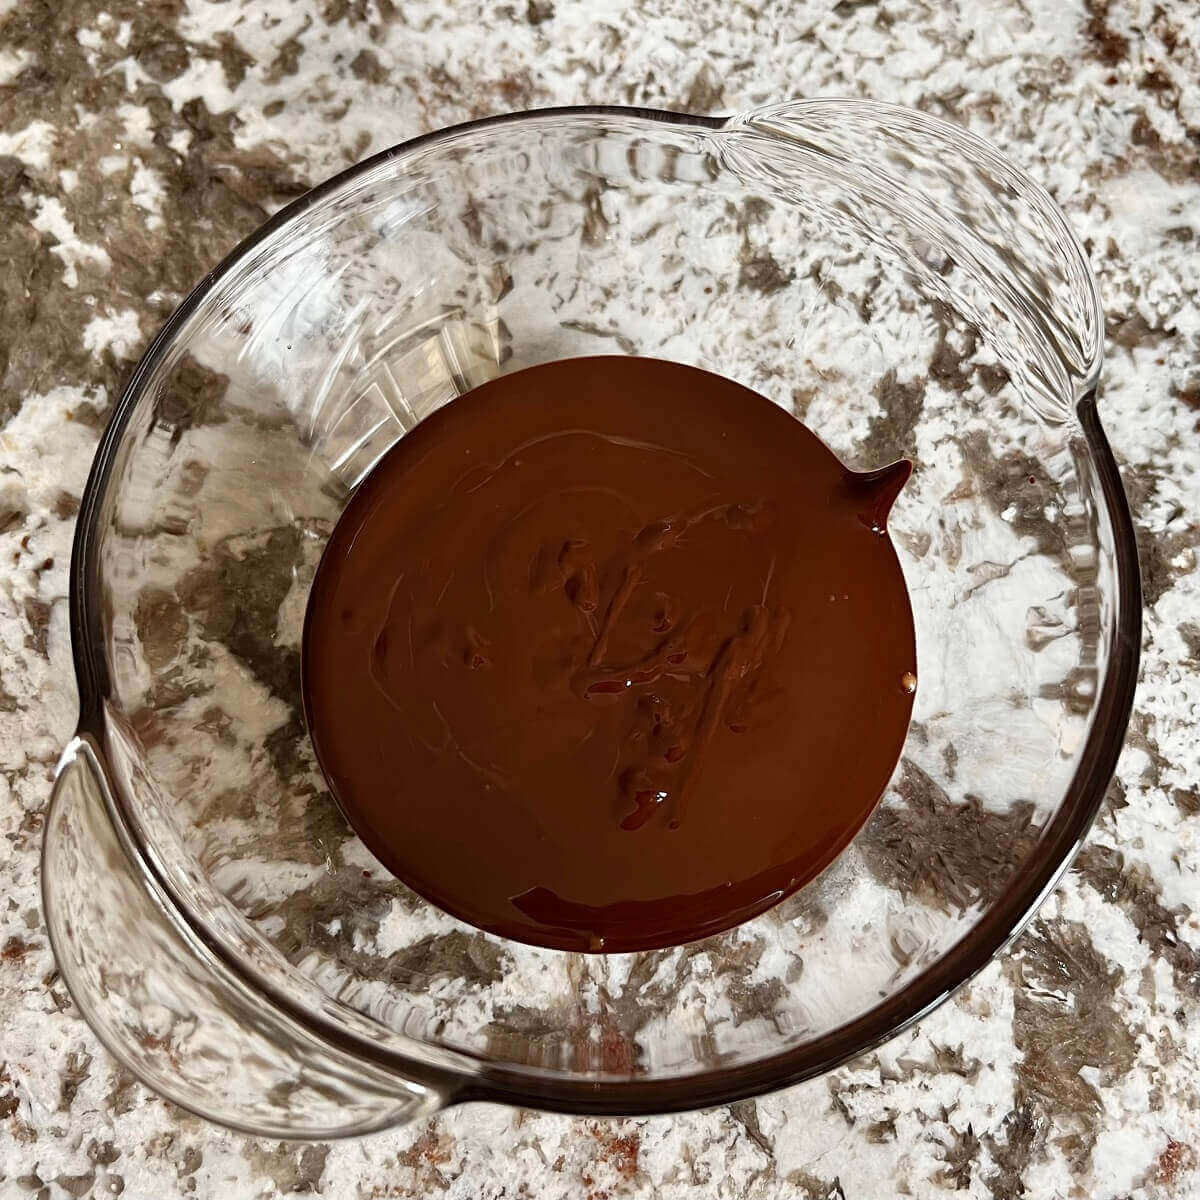 Melted warm dark chocolate in a glass bowl.